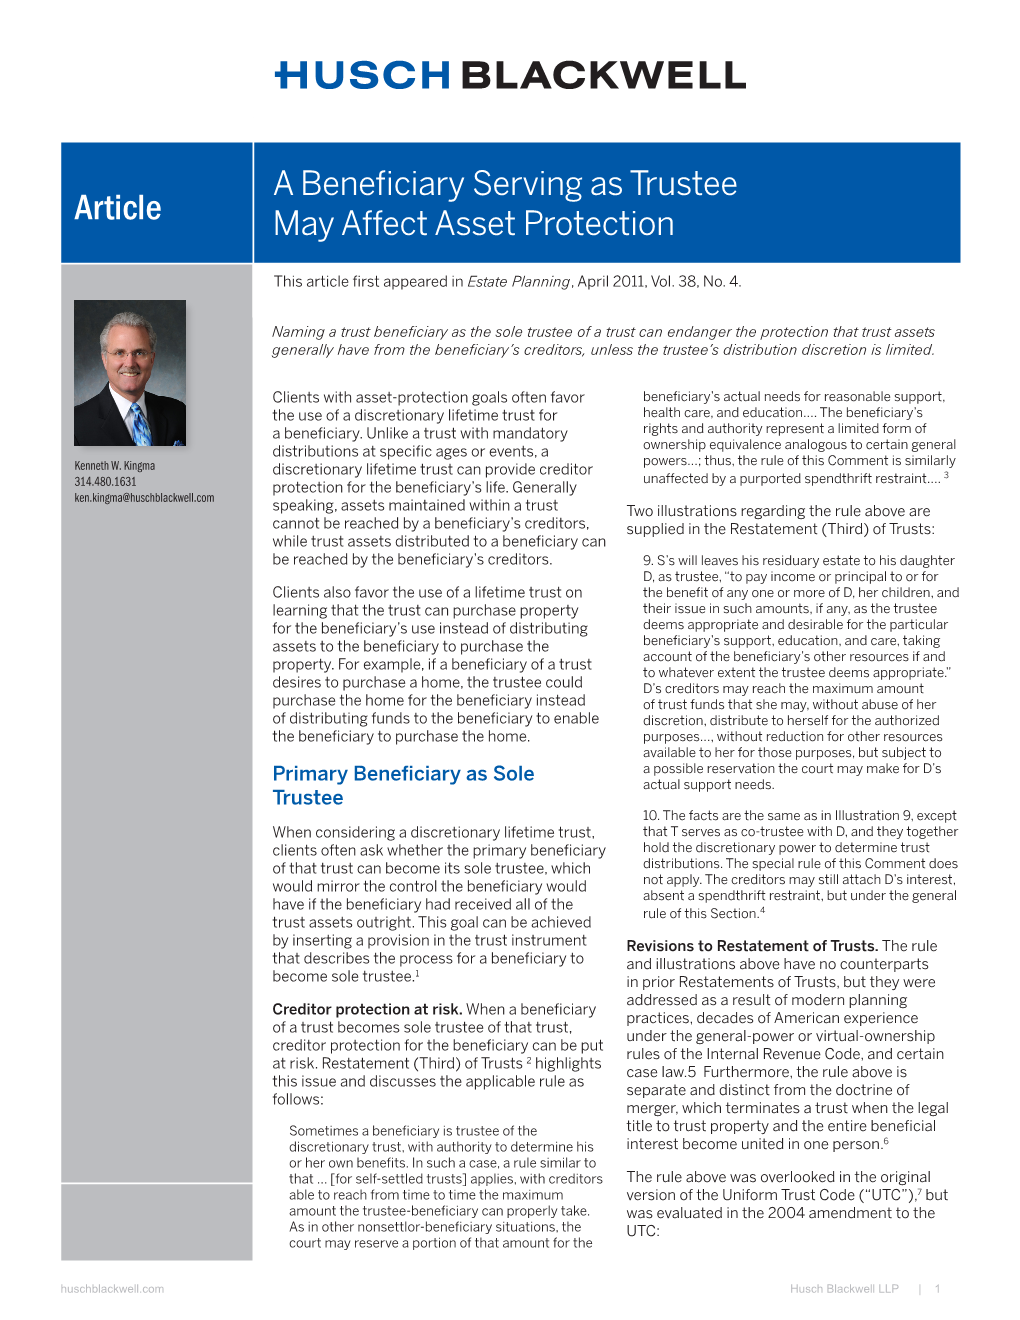 A Beneficiary Serving As Trustee May Affect Asset Protection